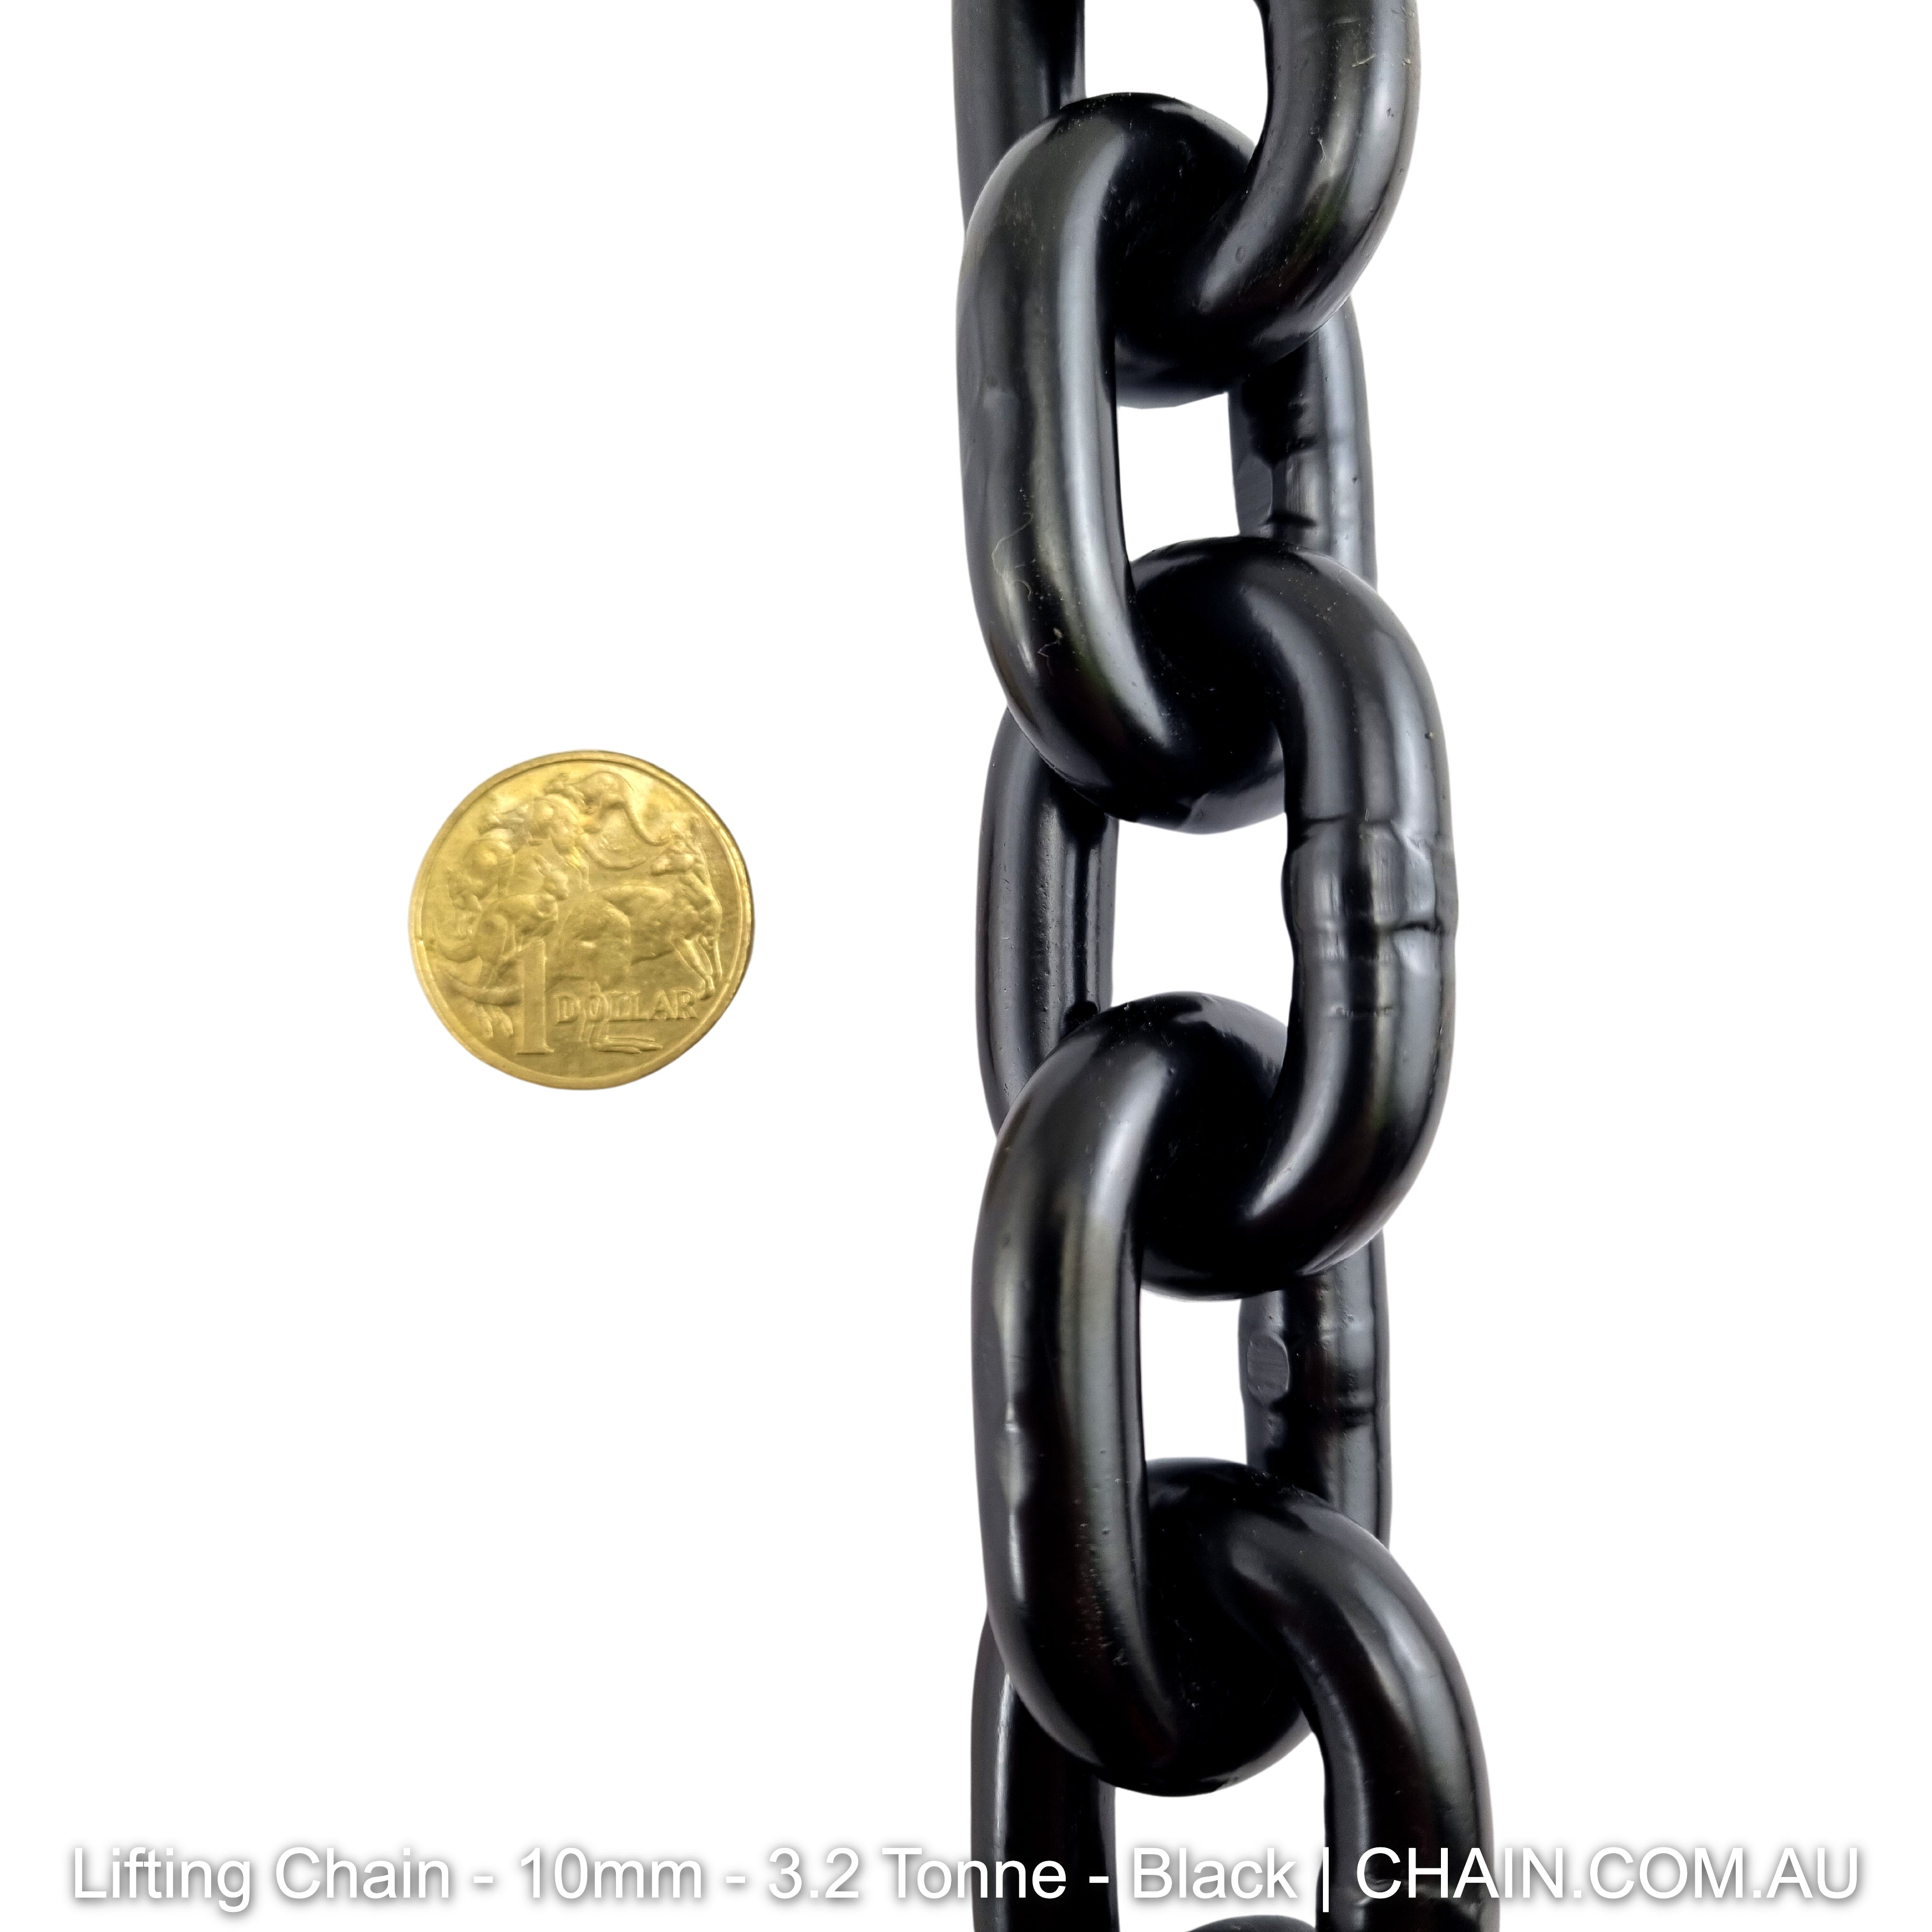 Lifting Chain - Black Steel - size: 10mm - Tested & Rated to 3.2 tonnes. Shop chain online at chain.com.au. Australia wide shipping.